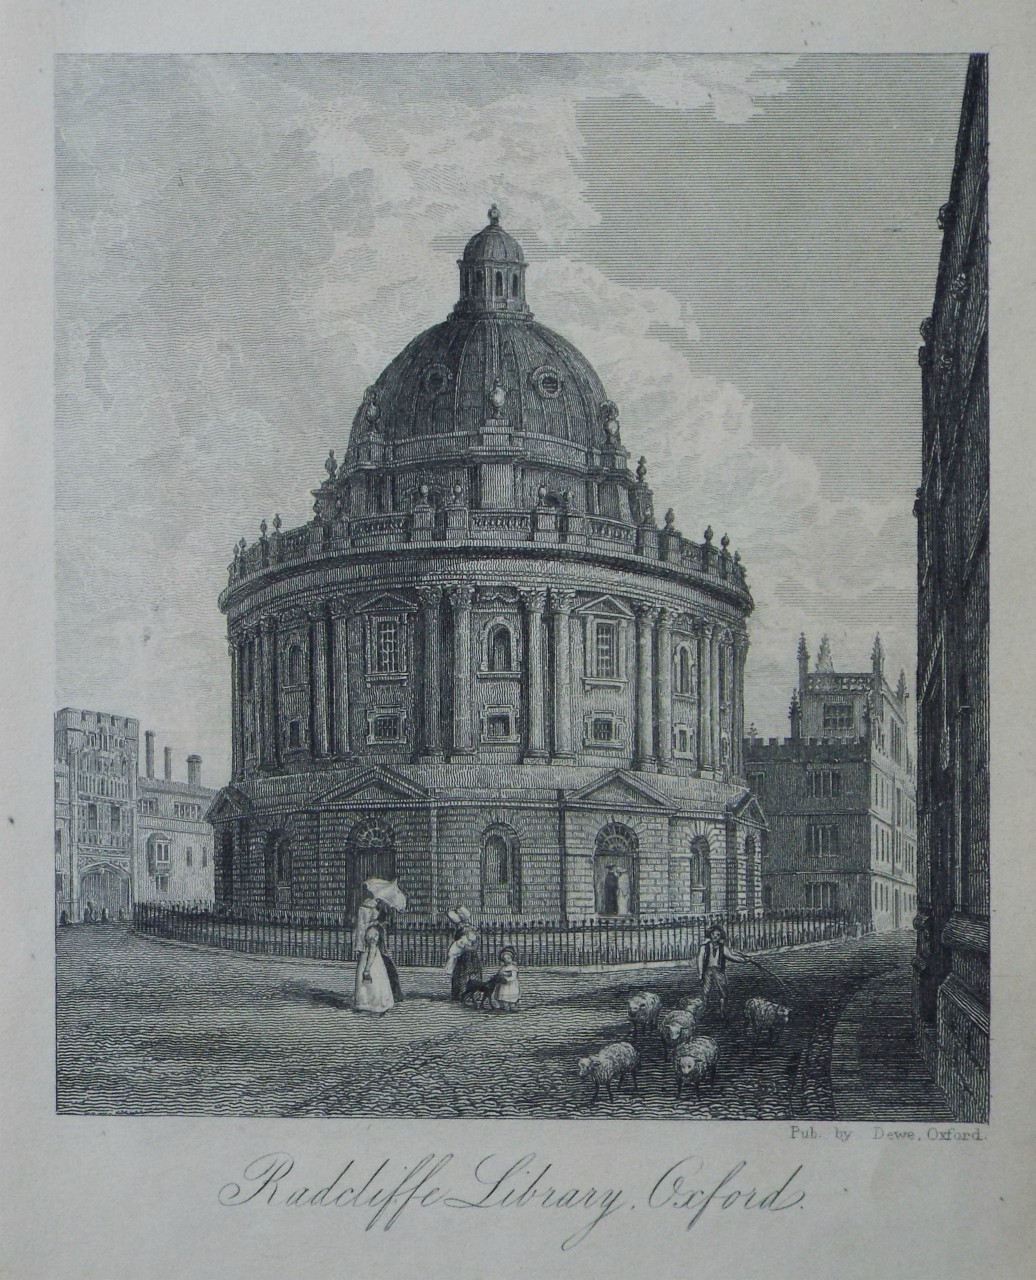 Print - Radcliffe Library, Oxford.